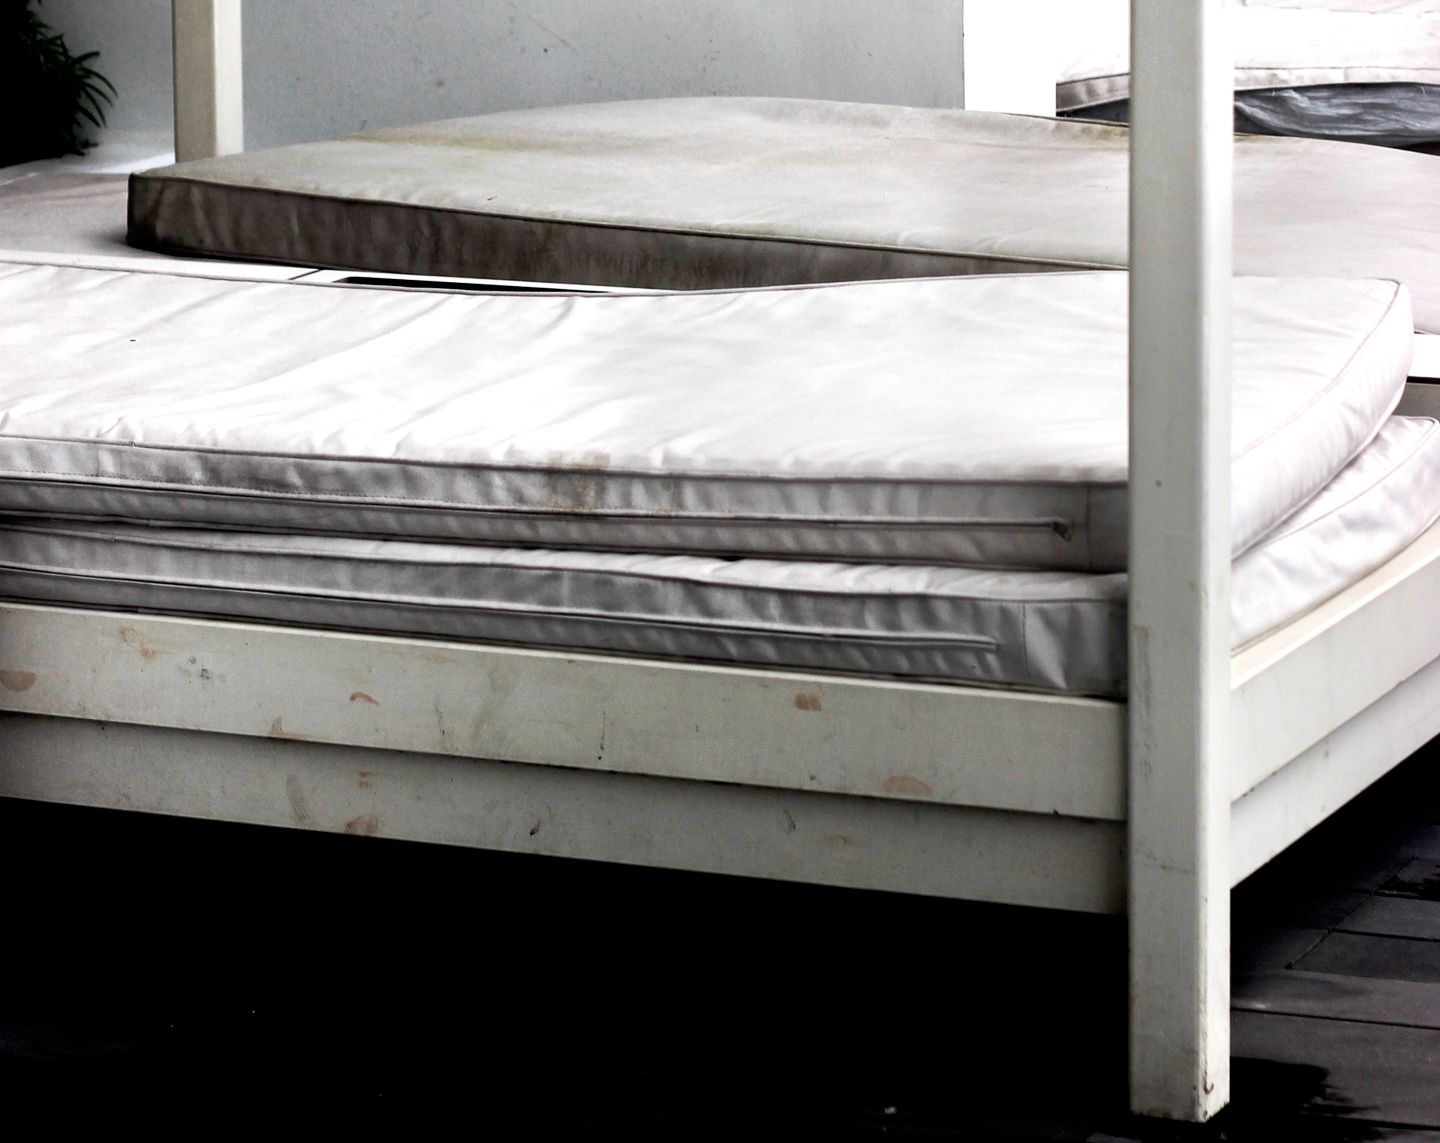 bed frame and mattress